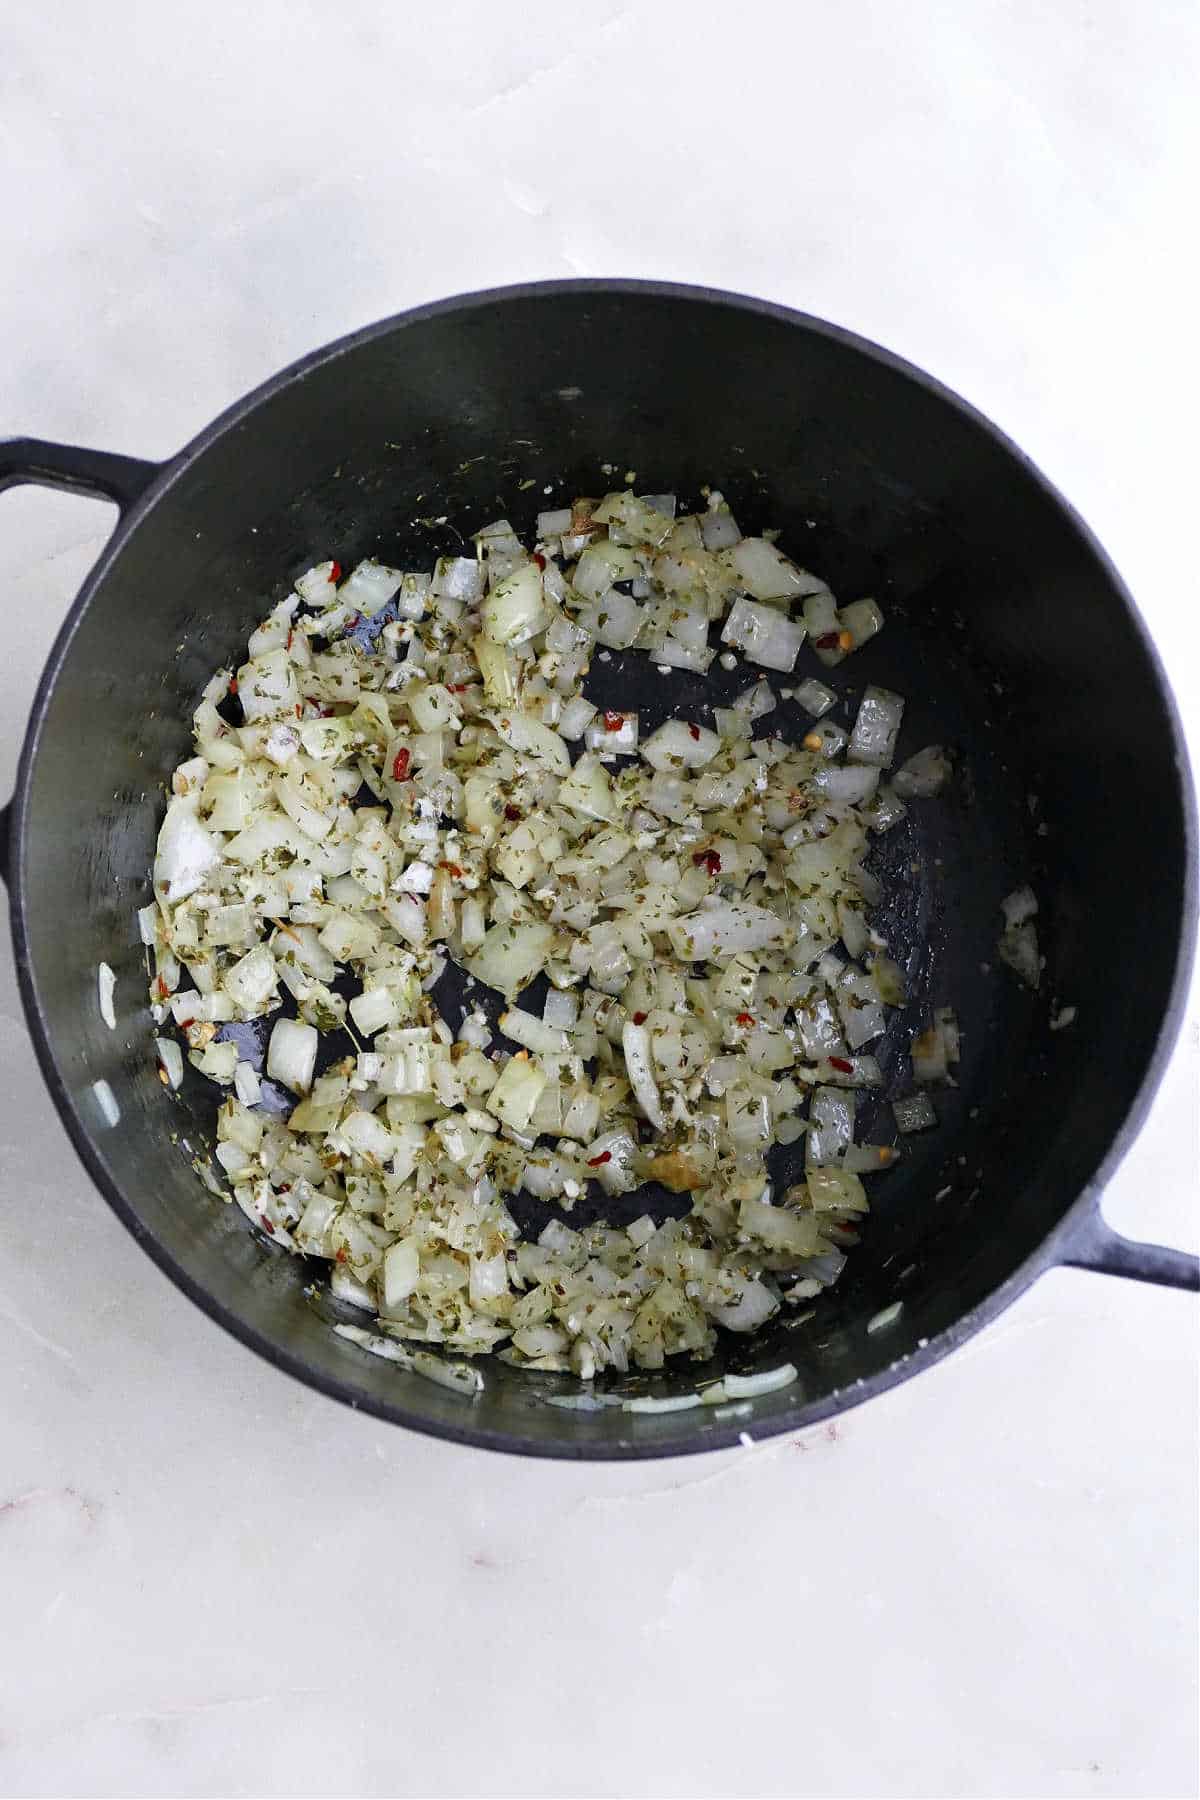 garlic, onions, and seasonings cooking in olive oil in a soup pot